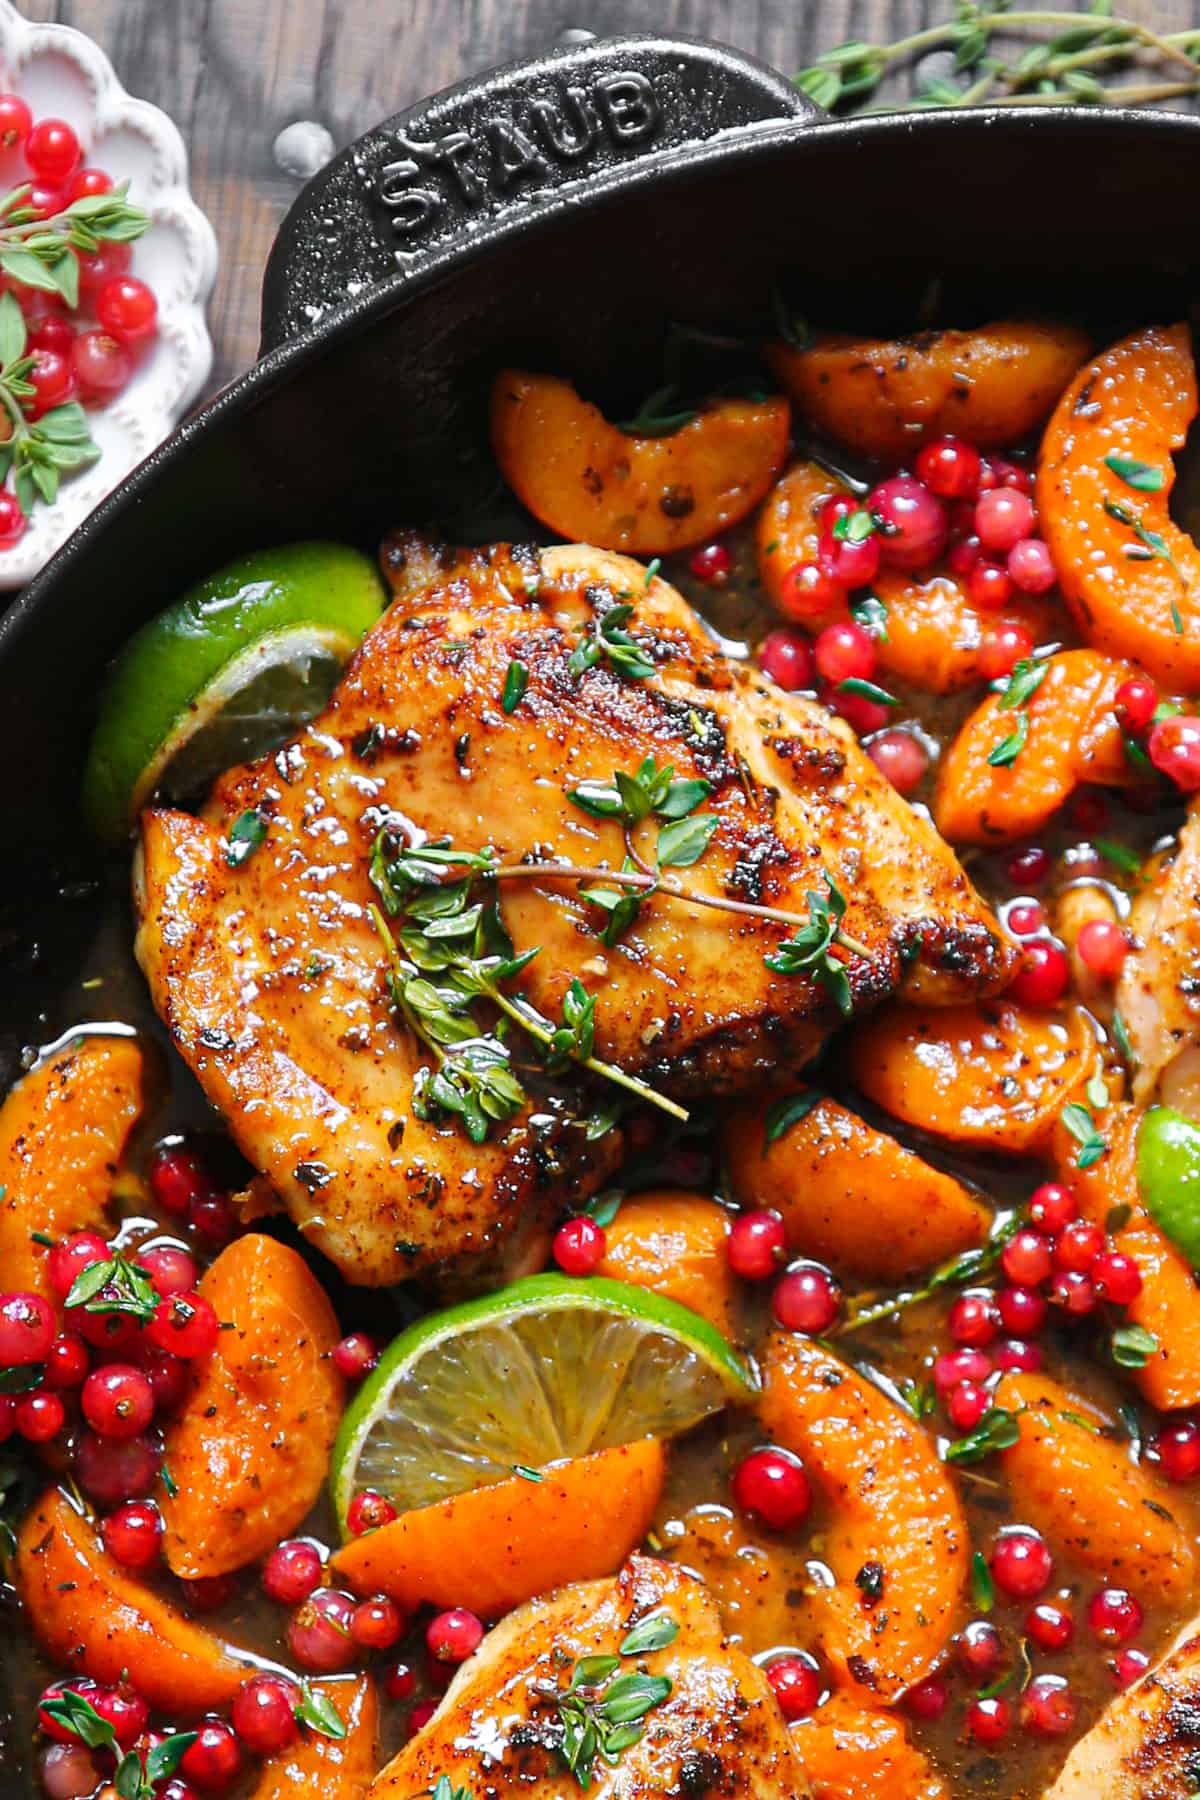 Seared Chicken Thighs with Red Currants, Apricots, Honey-Lime Sauce, garnished with lime slices - in a cast iron skillet.